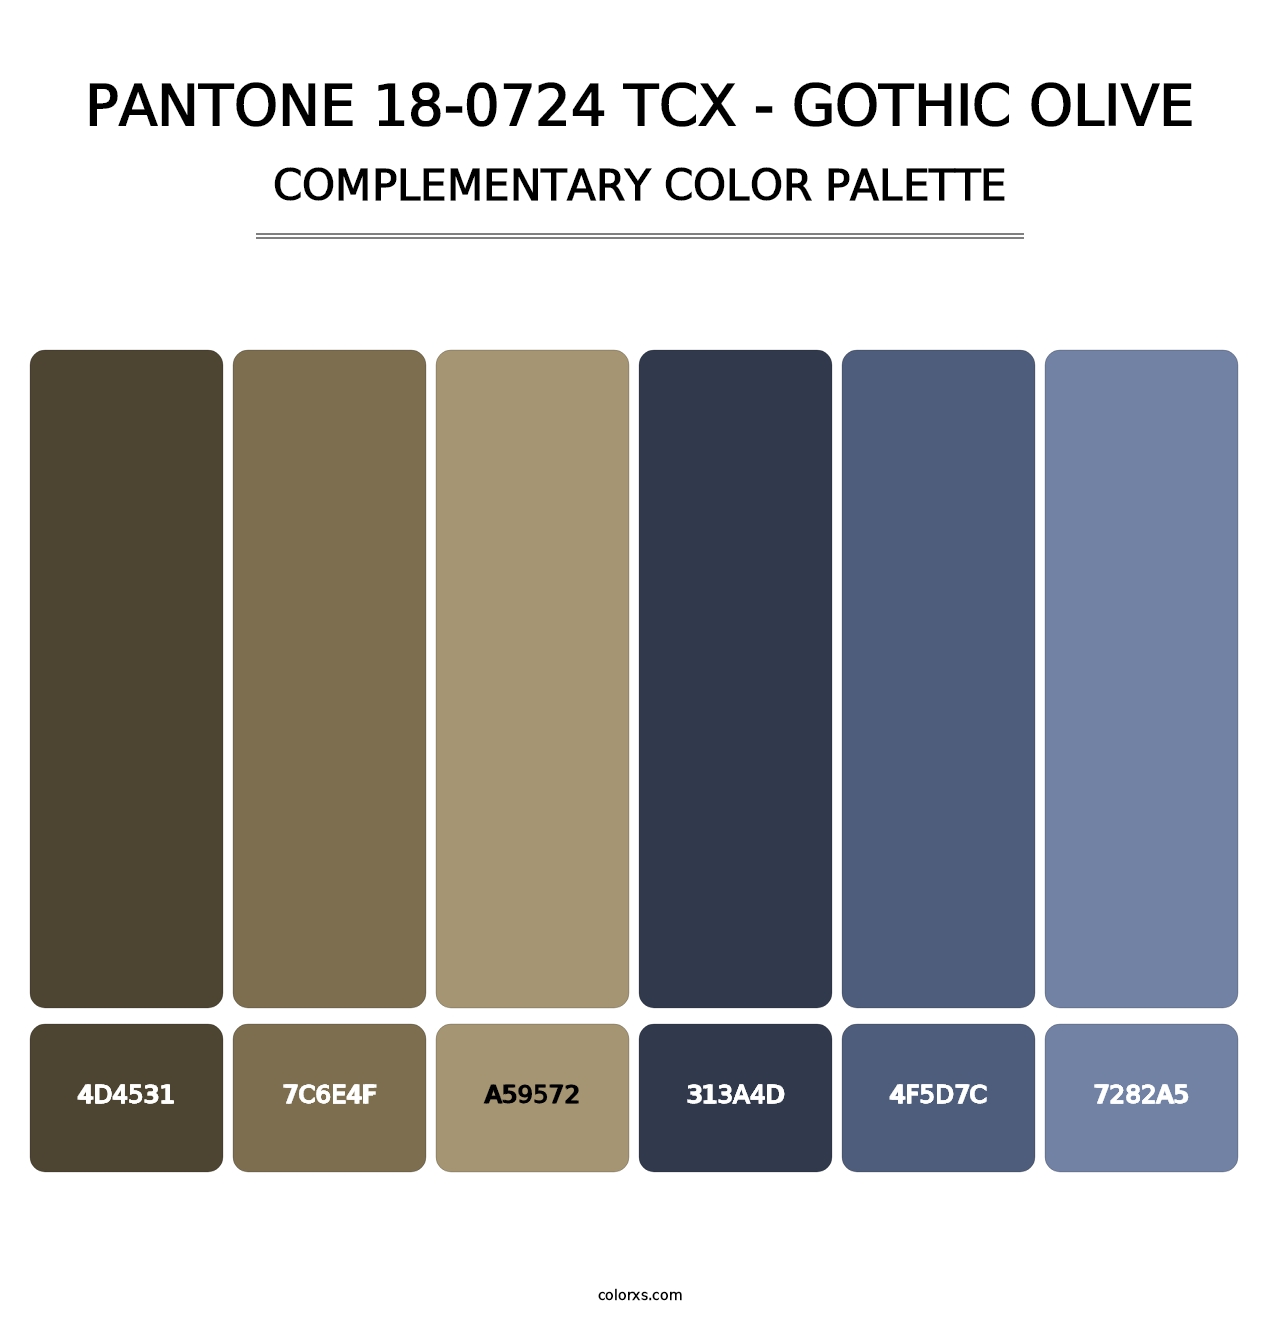 PANTONE 18-0724 TCX - Gothic Olive - Complementary Color Palette